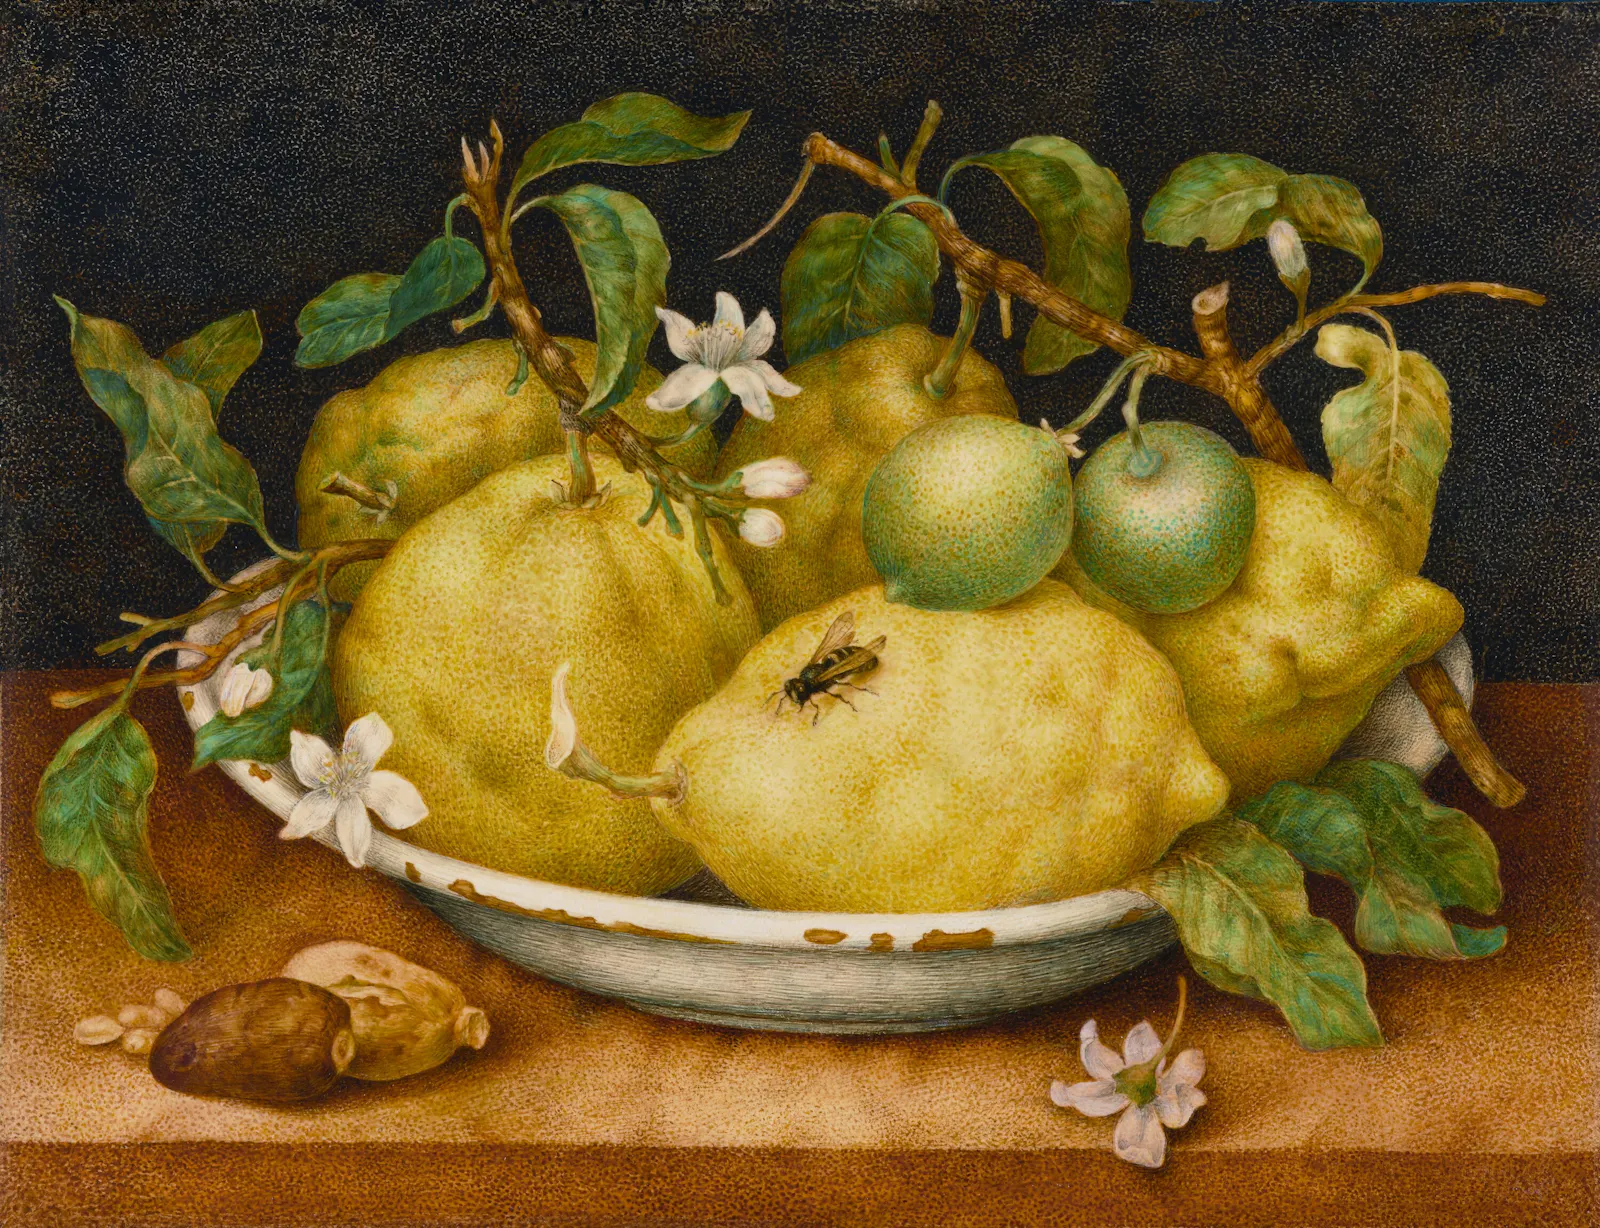 Giovanna Garzoni (Italian, 1600 - 1670)
Still Life with Bowl of Citrons, late 1640s
Tempera, on vellum
Unframed: 27.6 × 35.6 cm (10 7/8 × 14 in.), Framed [Outer Dim]: 35.6 × 43.8 × 3.5 cm (14 × 17 1/4 × 1 3/8 in.)
The J. Paul Getty Museum, Los Angeles, 2001.29